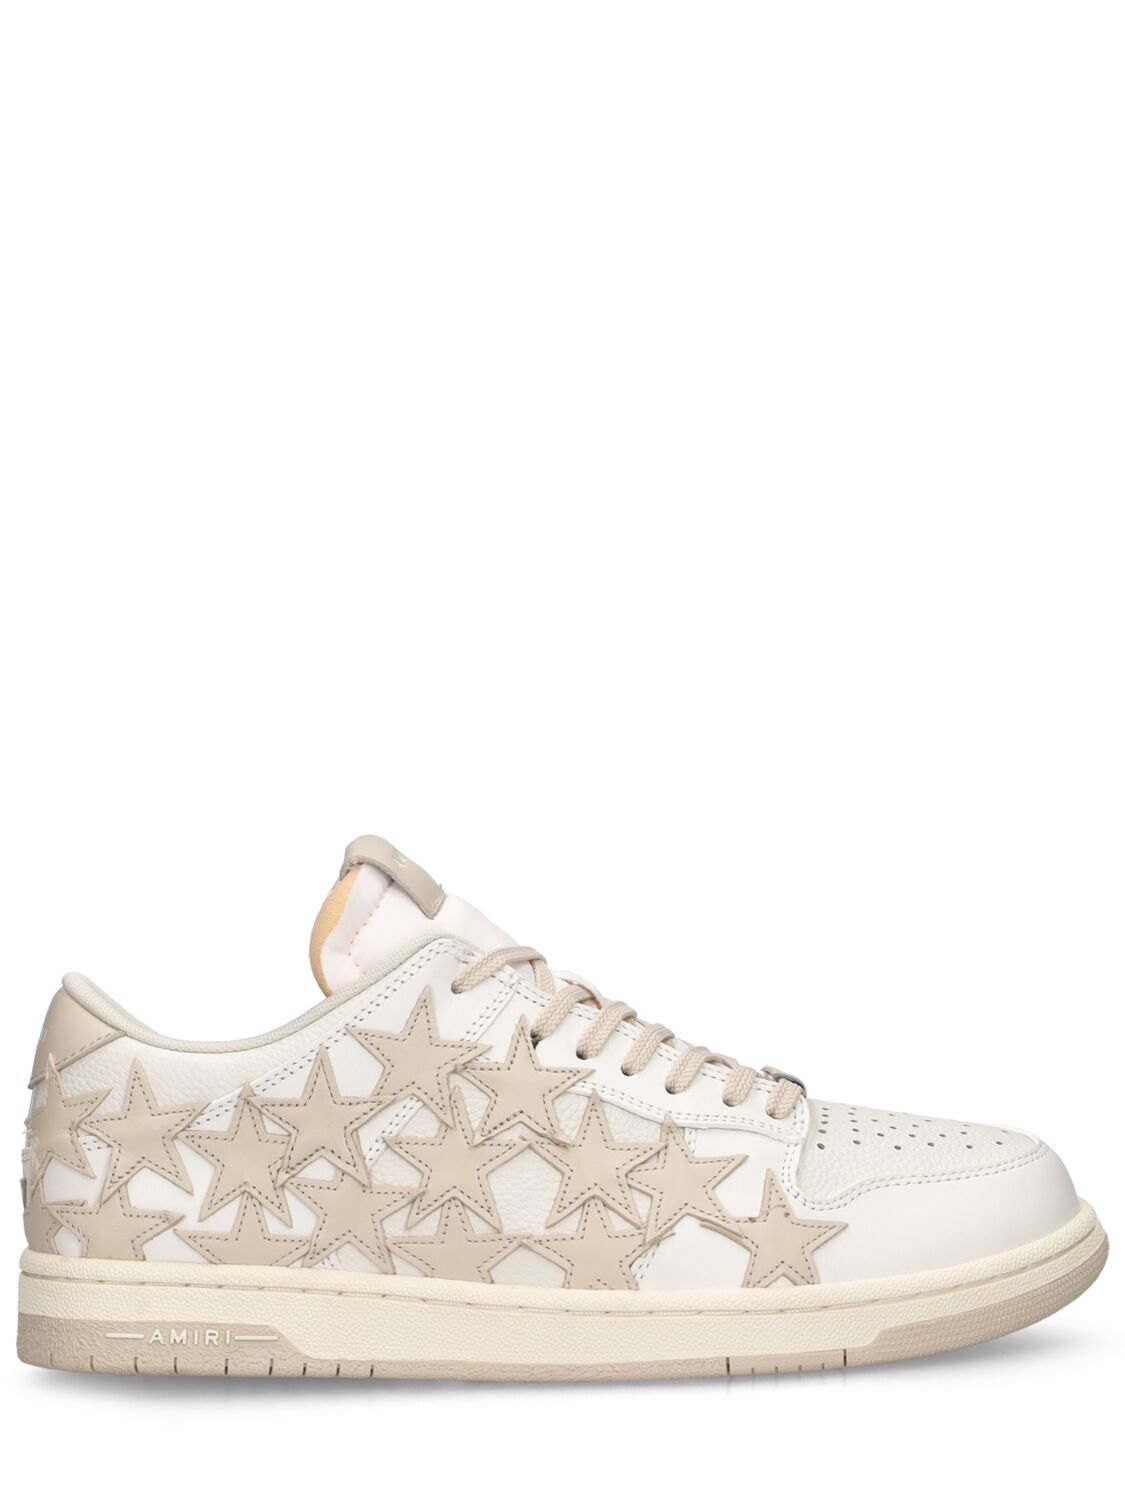 Amiri Stars Leather Low Top Sneakers In White